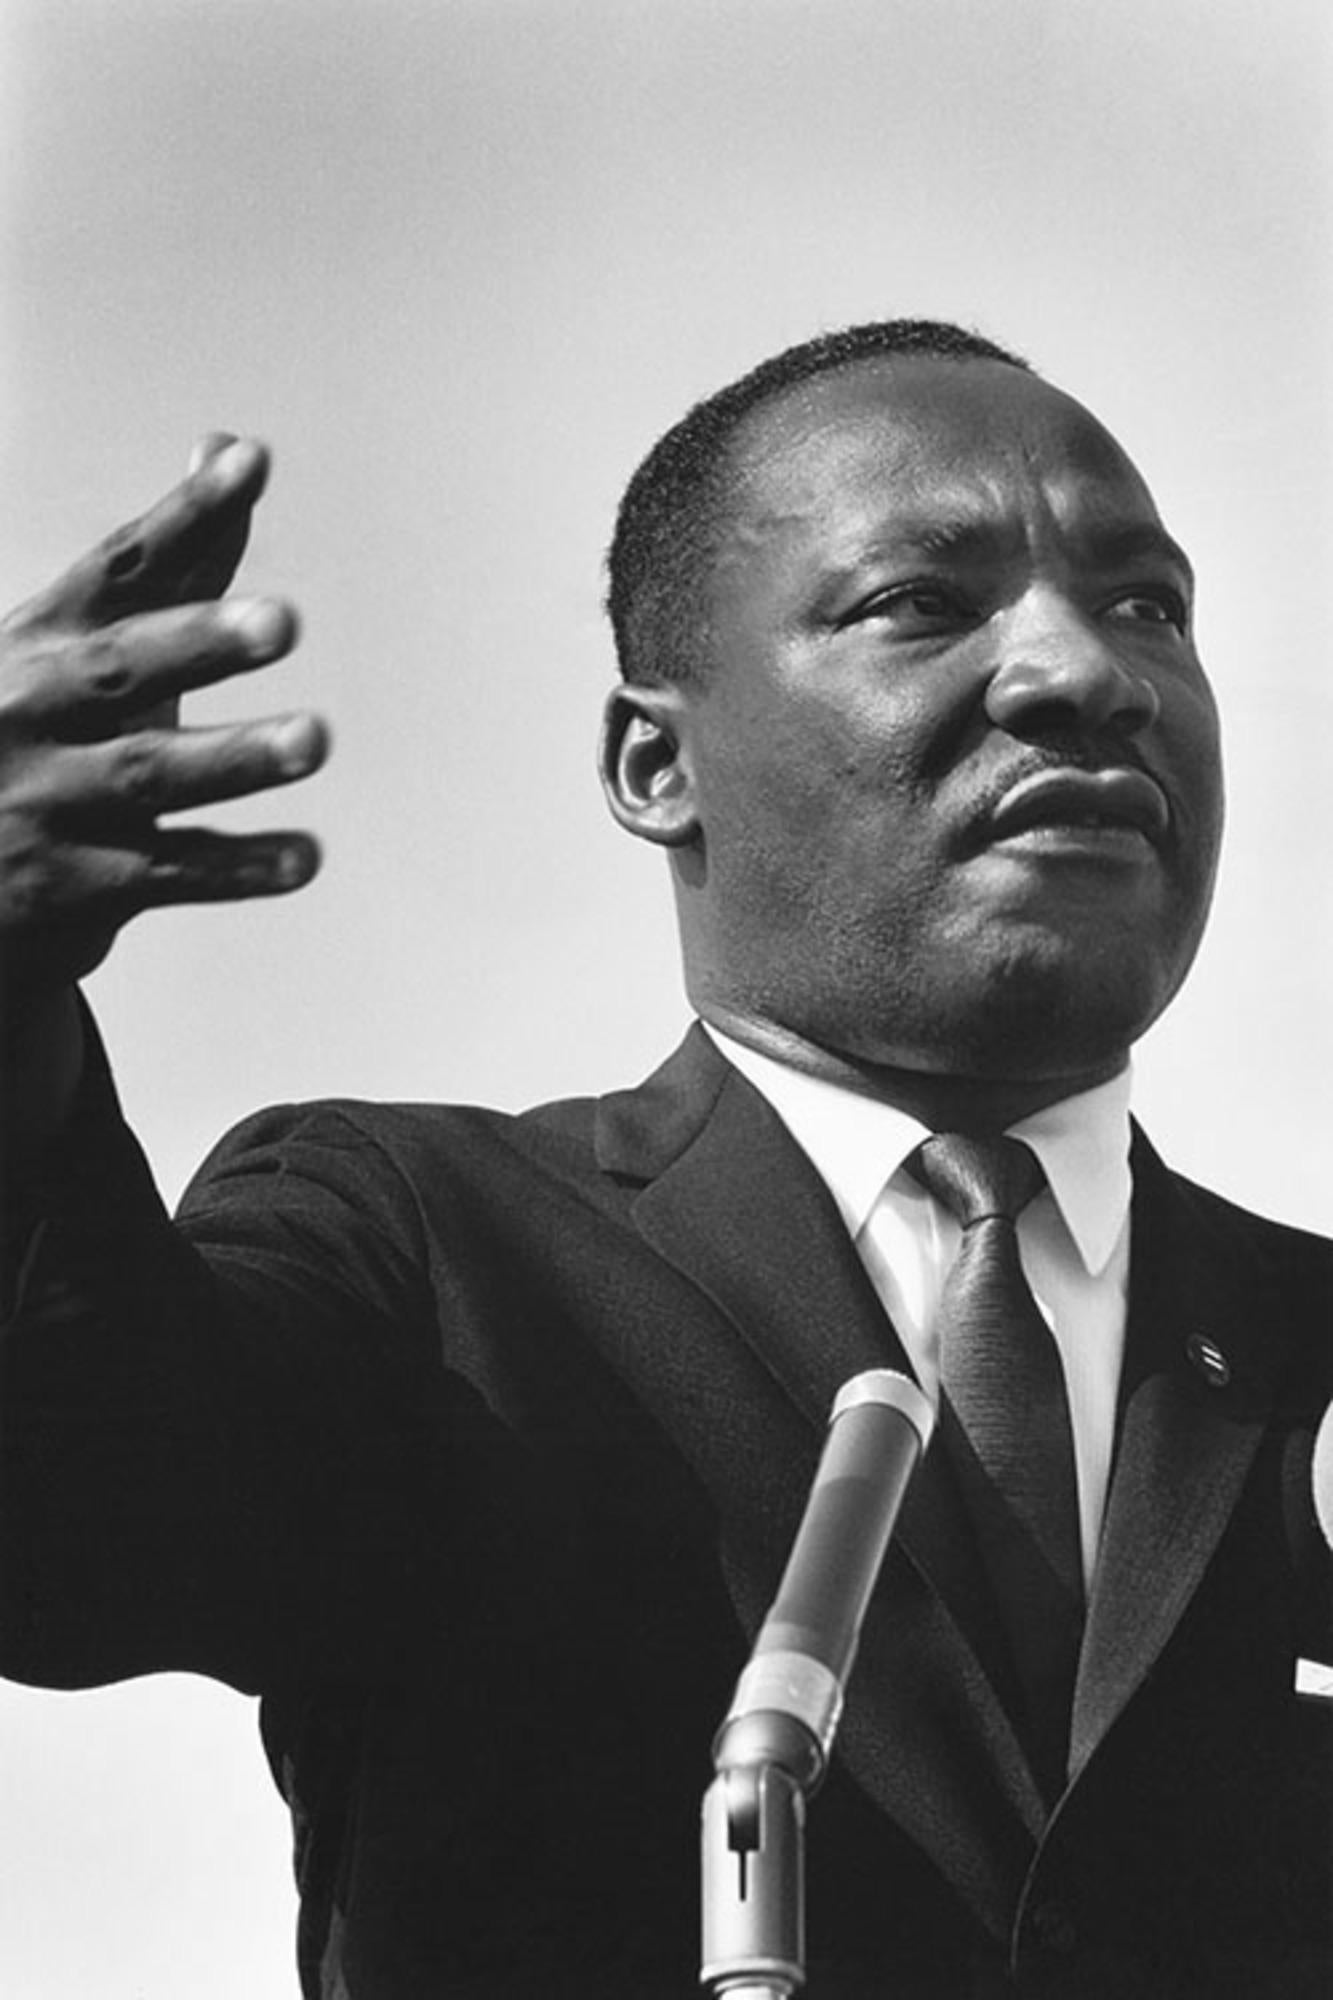 Estate-stamped, gelatin-print silver

Dr. Martin Luther King at the ‘Illinois Rally for Civil Rights’ at Soldier Field in Chicago, IL, US, June 21, 1964

Available sizes: 
20”x16" Edition of 25
24”x20" Edition of 25
40”x30" Edition of 25
60”x40”